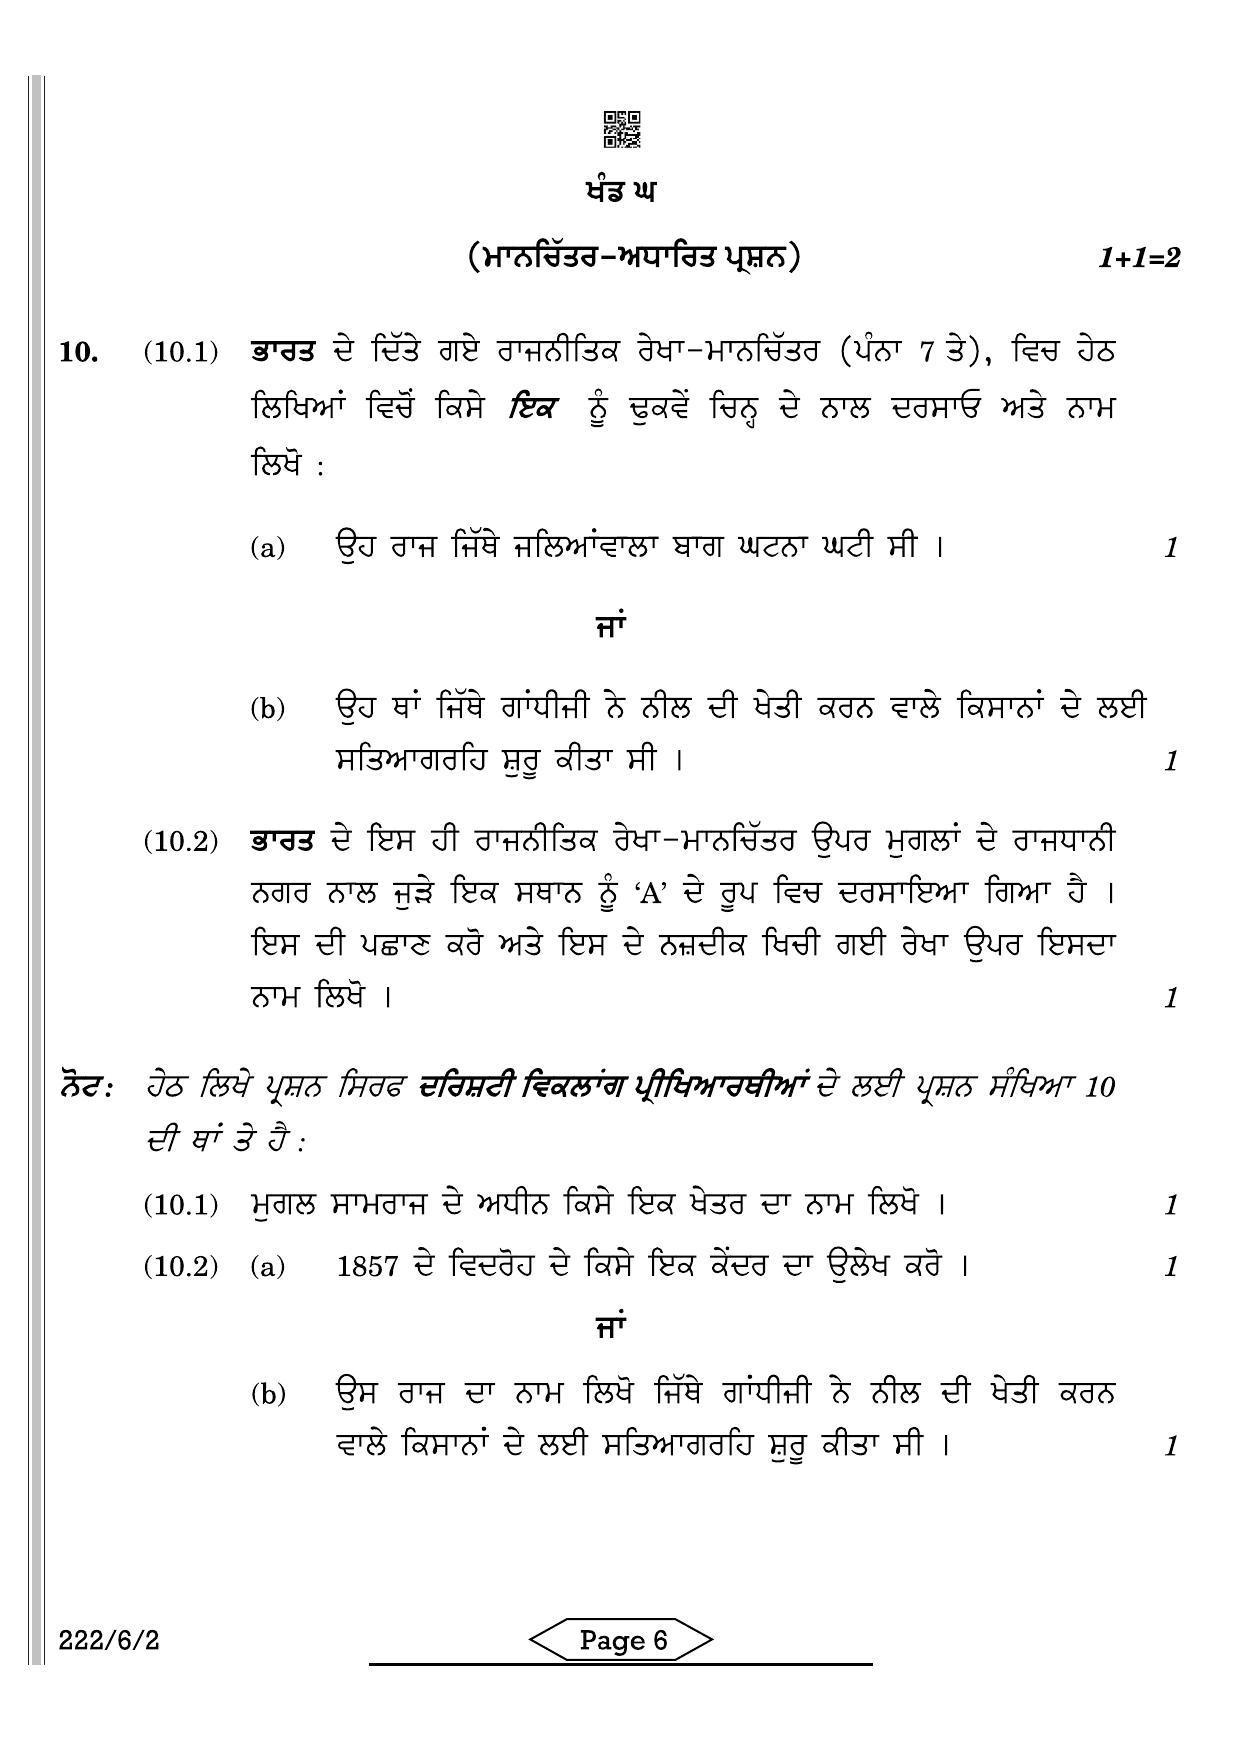 CBSE Class 12 222-6-2 History Punjabi 2022 Compartment Question Paper - Page 6